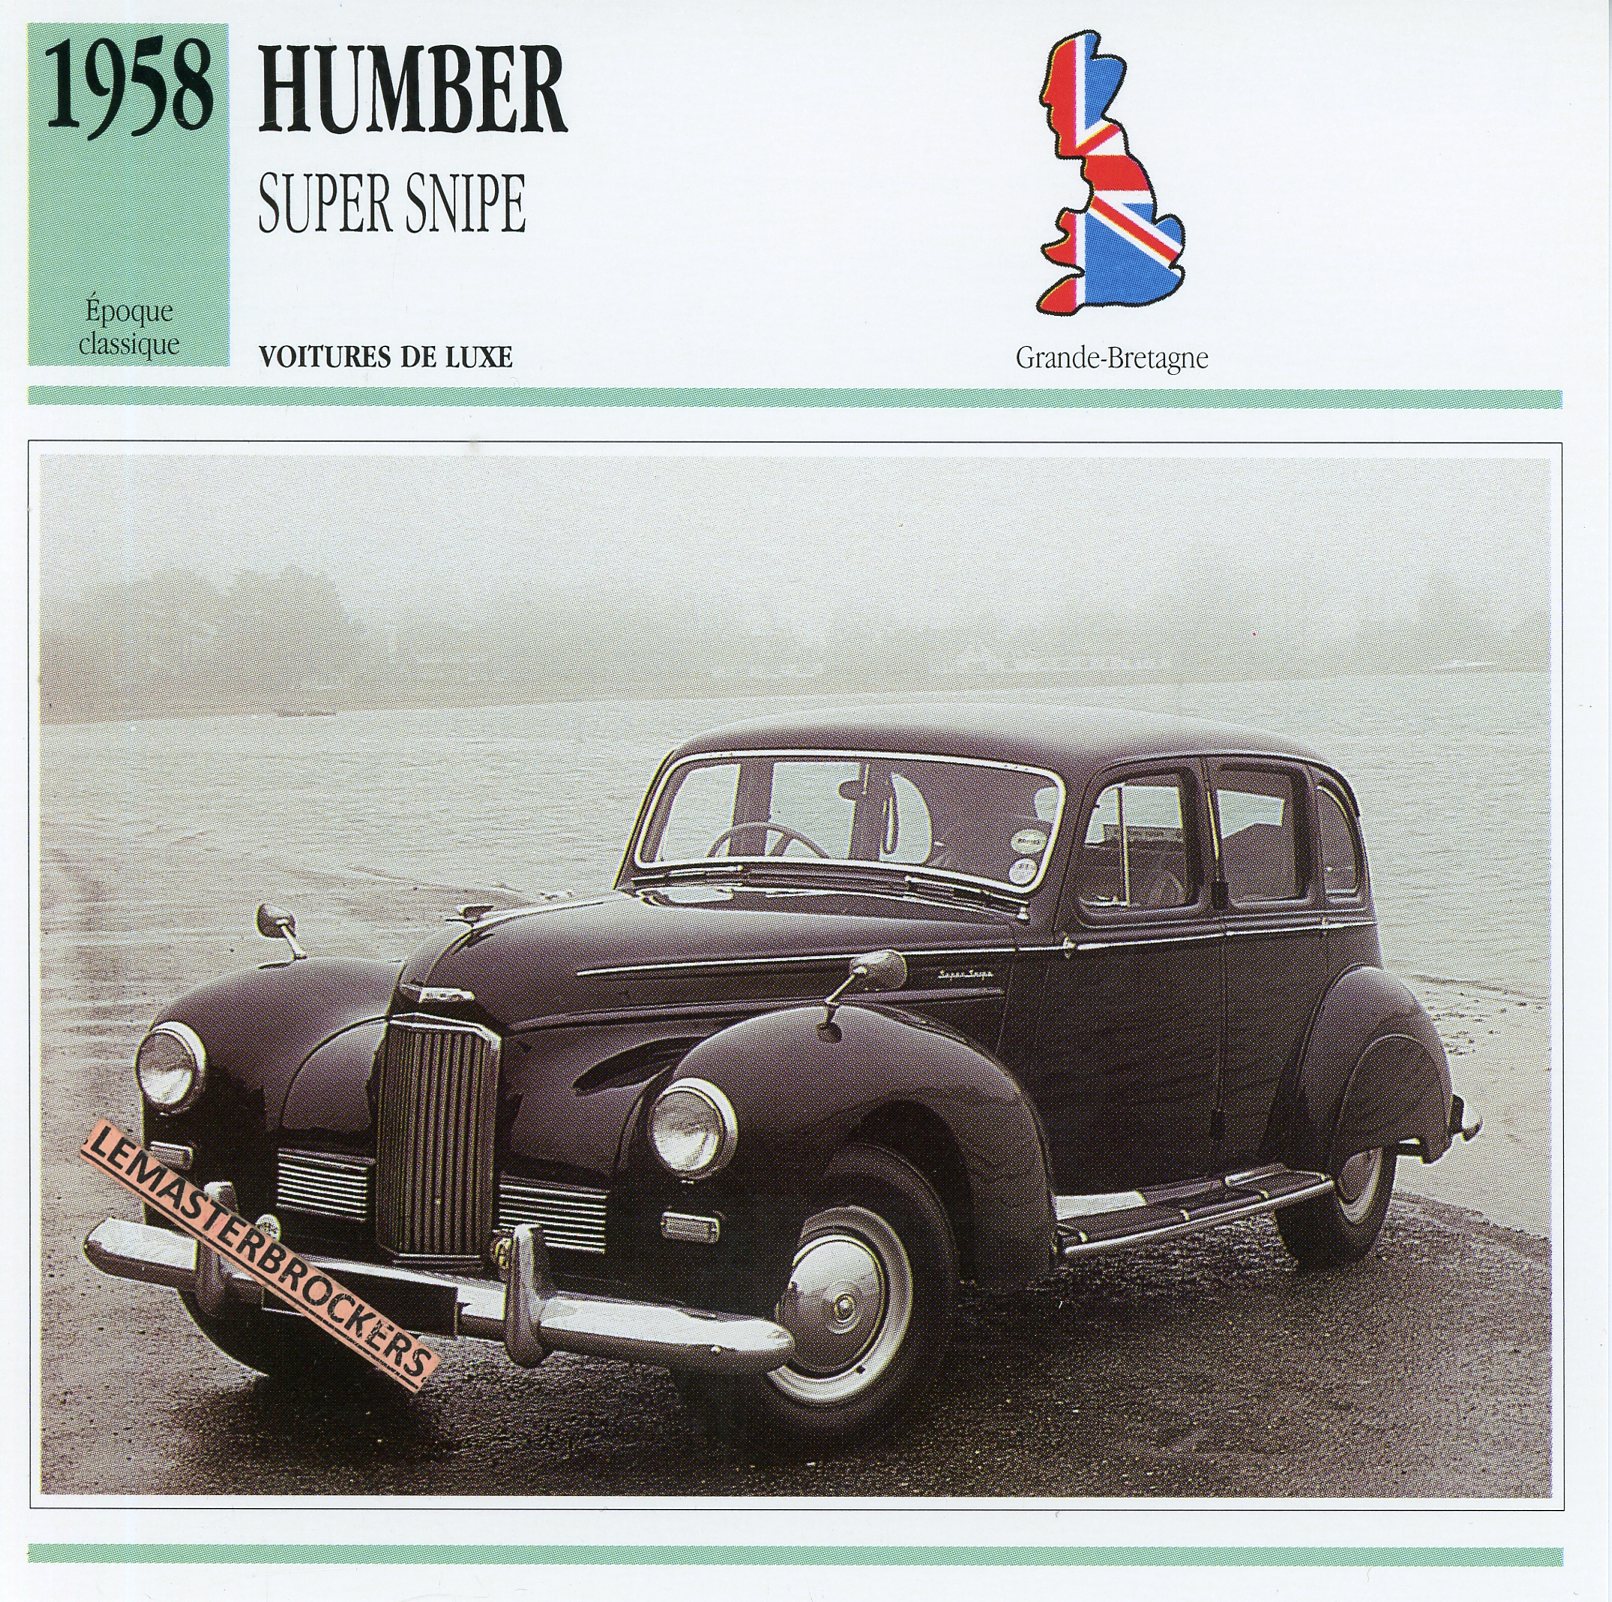 FICHE-AUTO-HUMBER-SUPER-SNIPE-LEMASTERBROCKERS-CARD-CARS